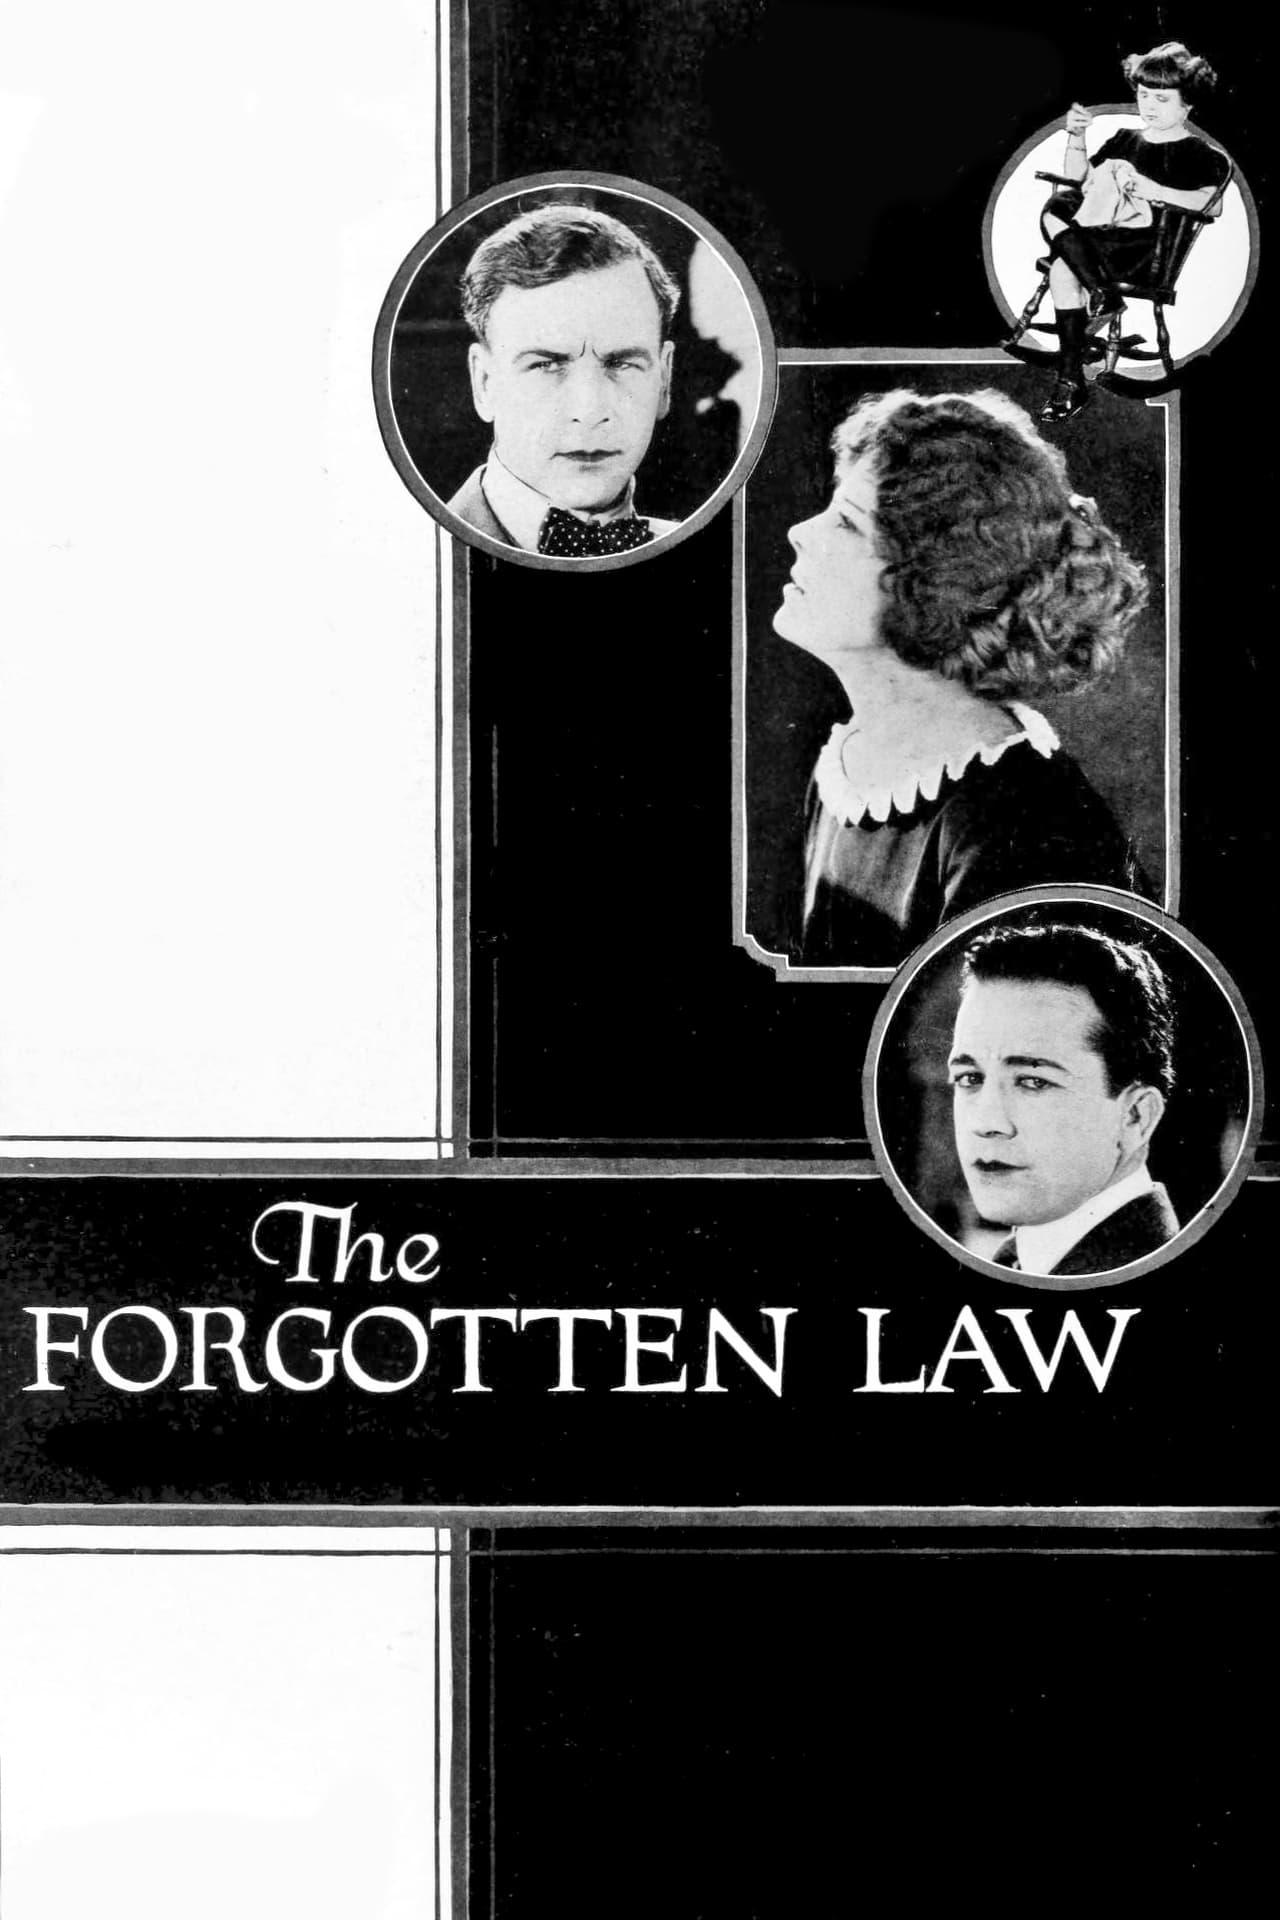 The Forgotten Law poster